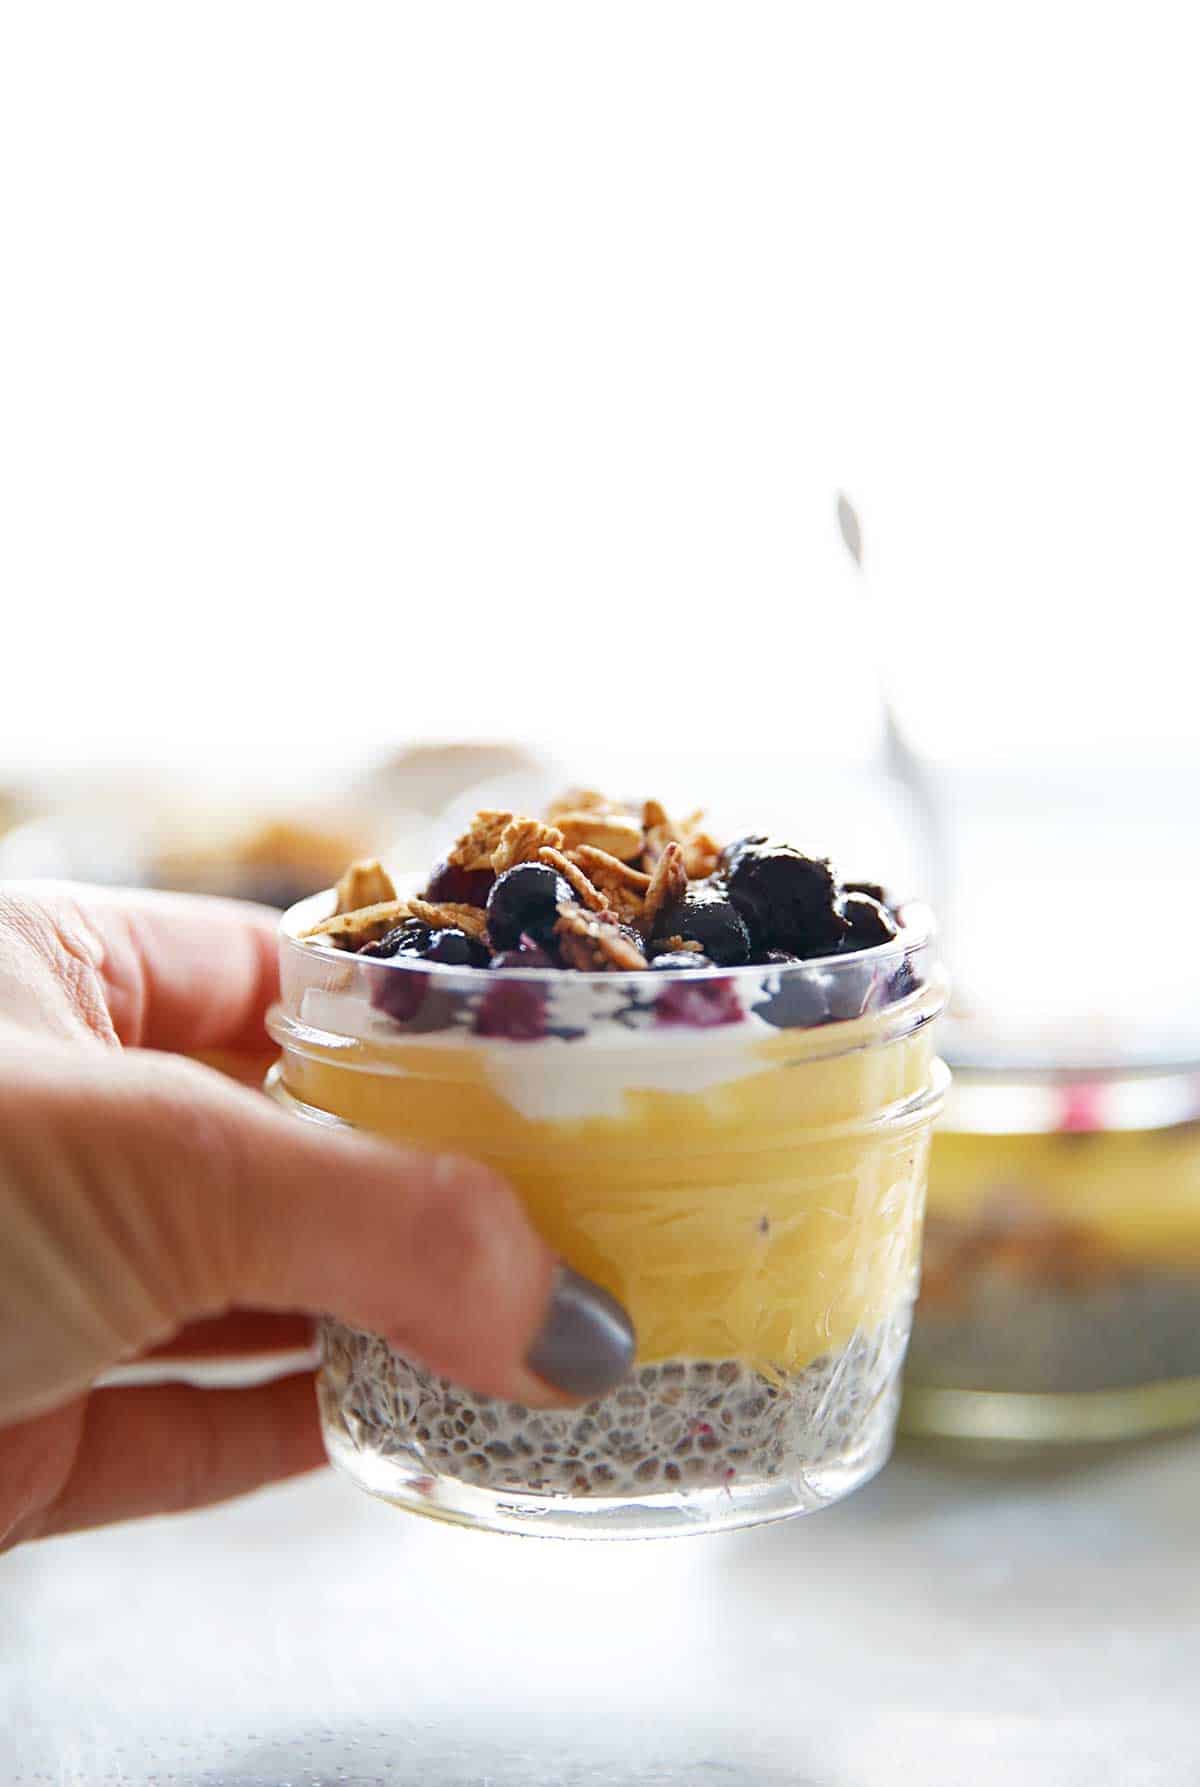 Lemon Curd and Blueberry Compote Breakfast Parfaits